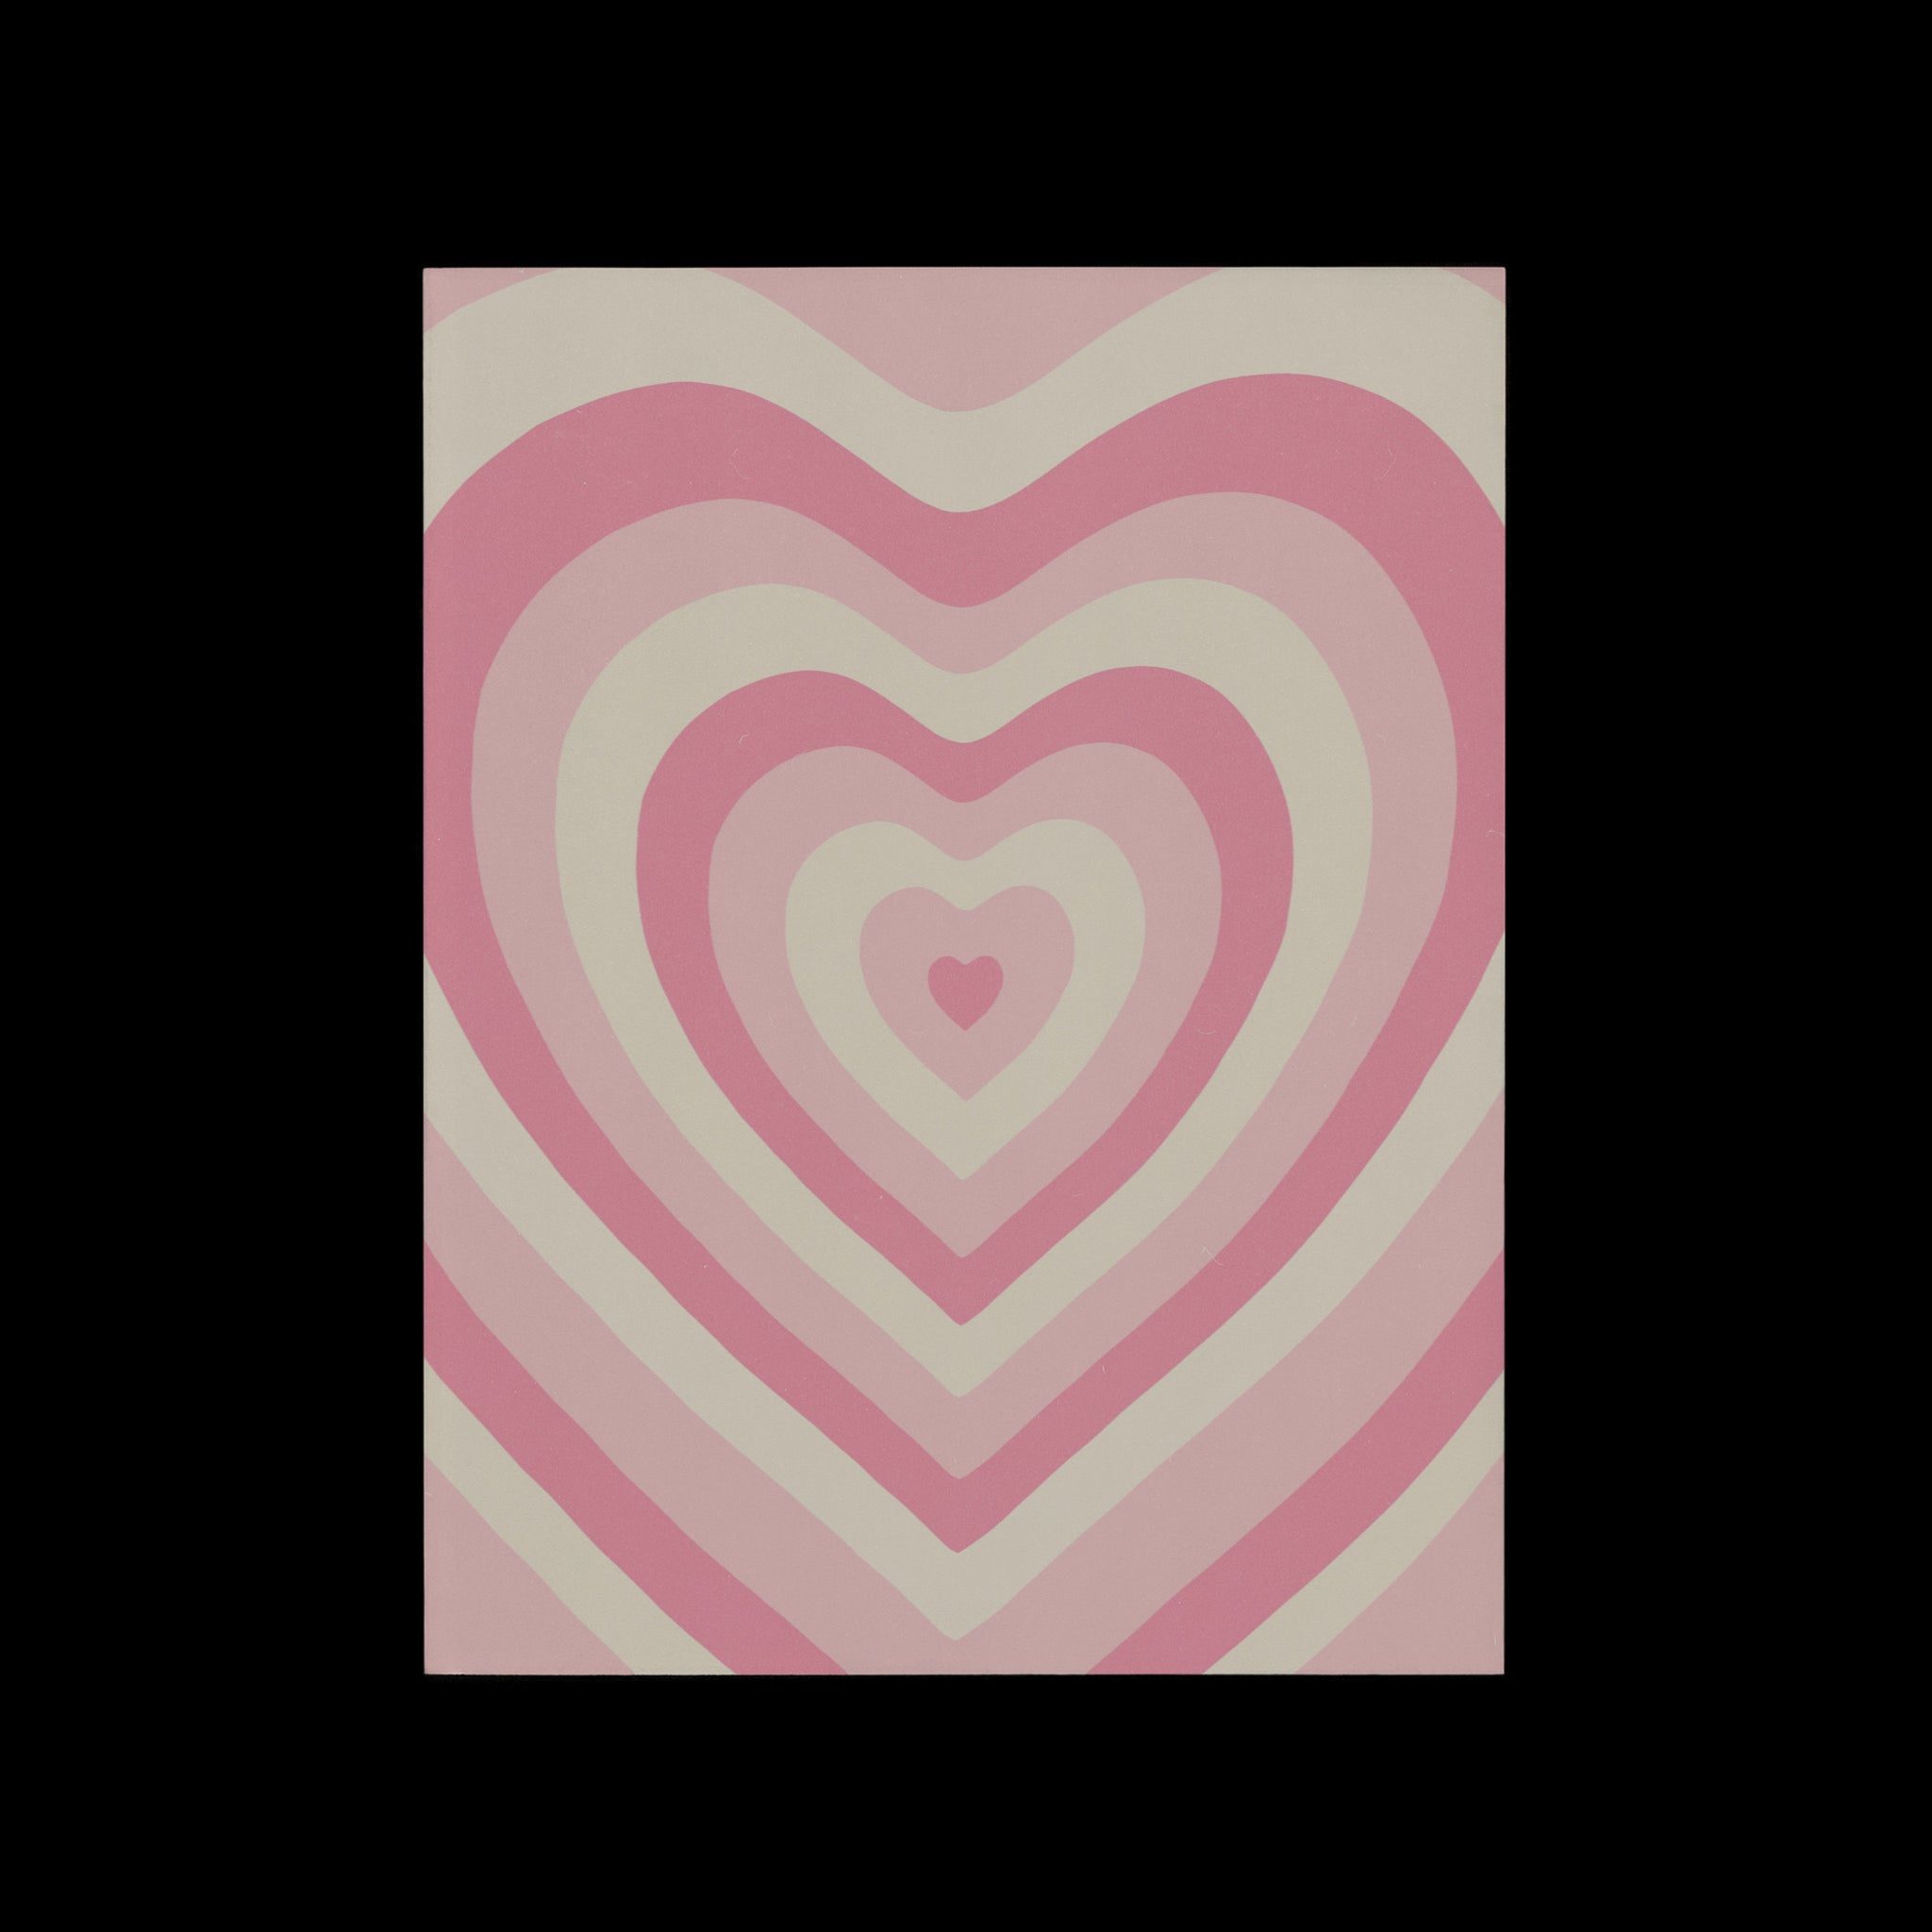 © les muses / Trendy endless heart design art prints with a girly Y2K and groovy 70s aesthetic.
Cool retro style posters perfect for danish pastel wall art decor in a dorm or apartment.